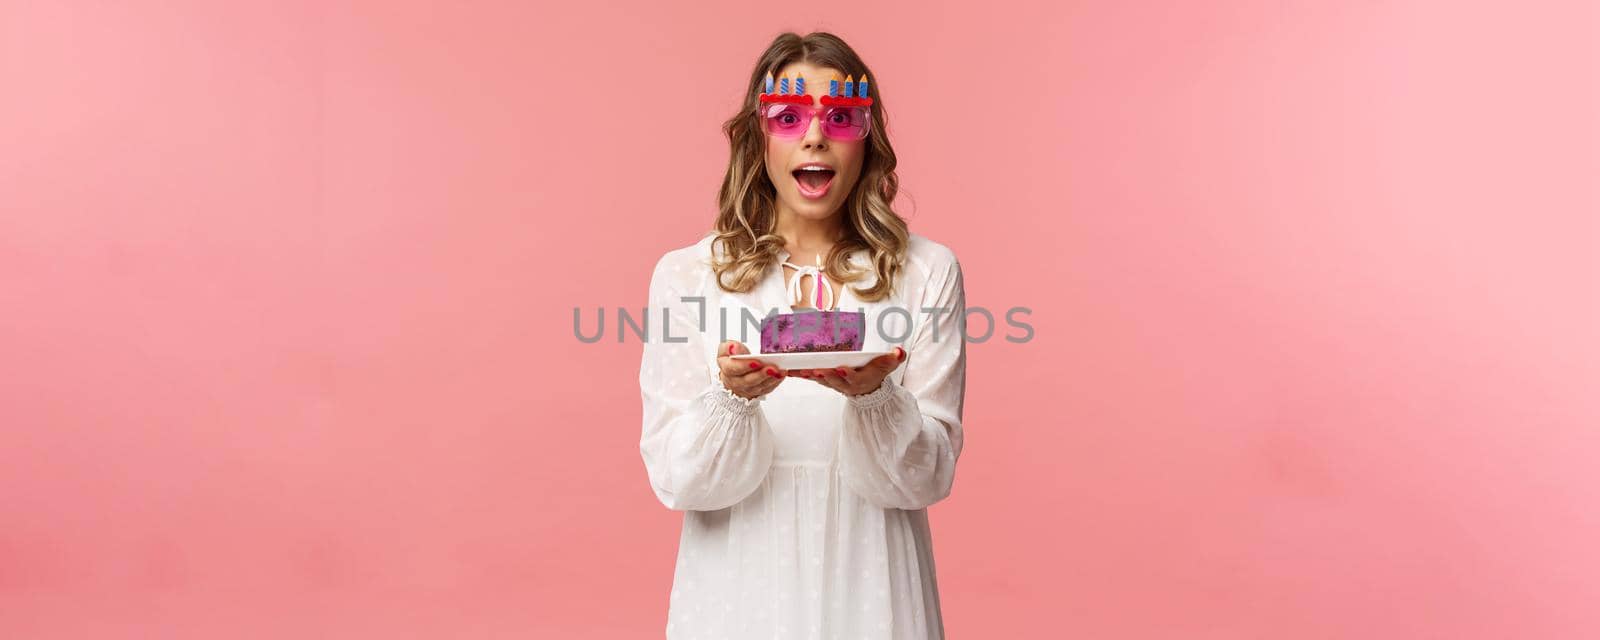 Holidays, spring and party concept. Excited, happy attractive blond woman in white dress, wearing funny b-day glasses, holding birthday cake with lit candle, making wish smiling camera.